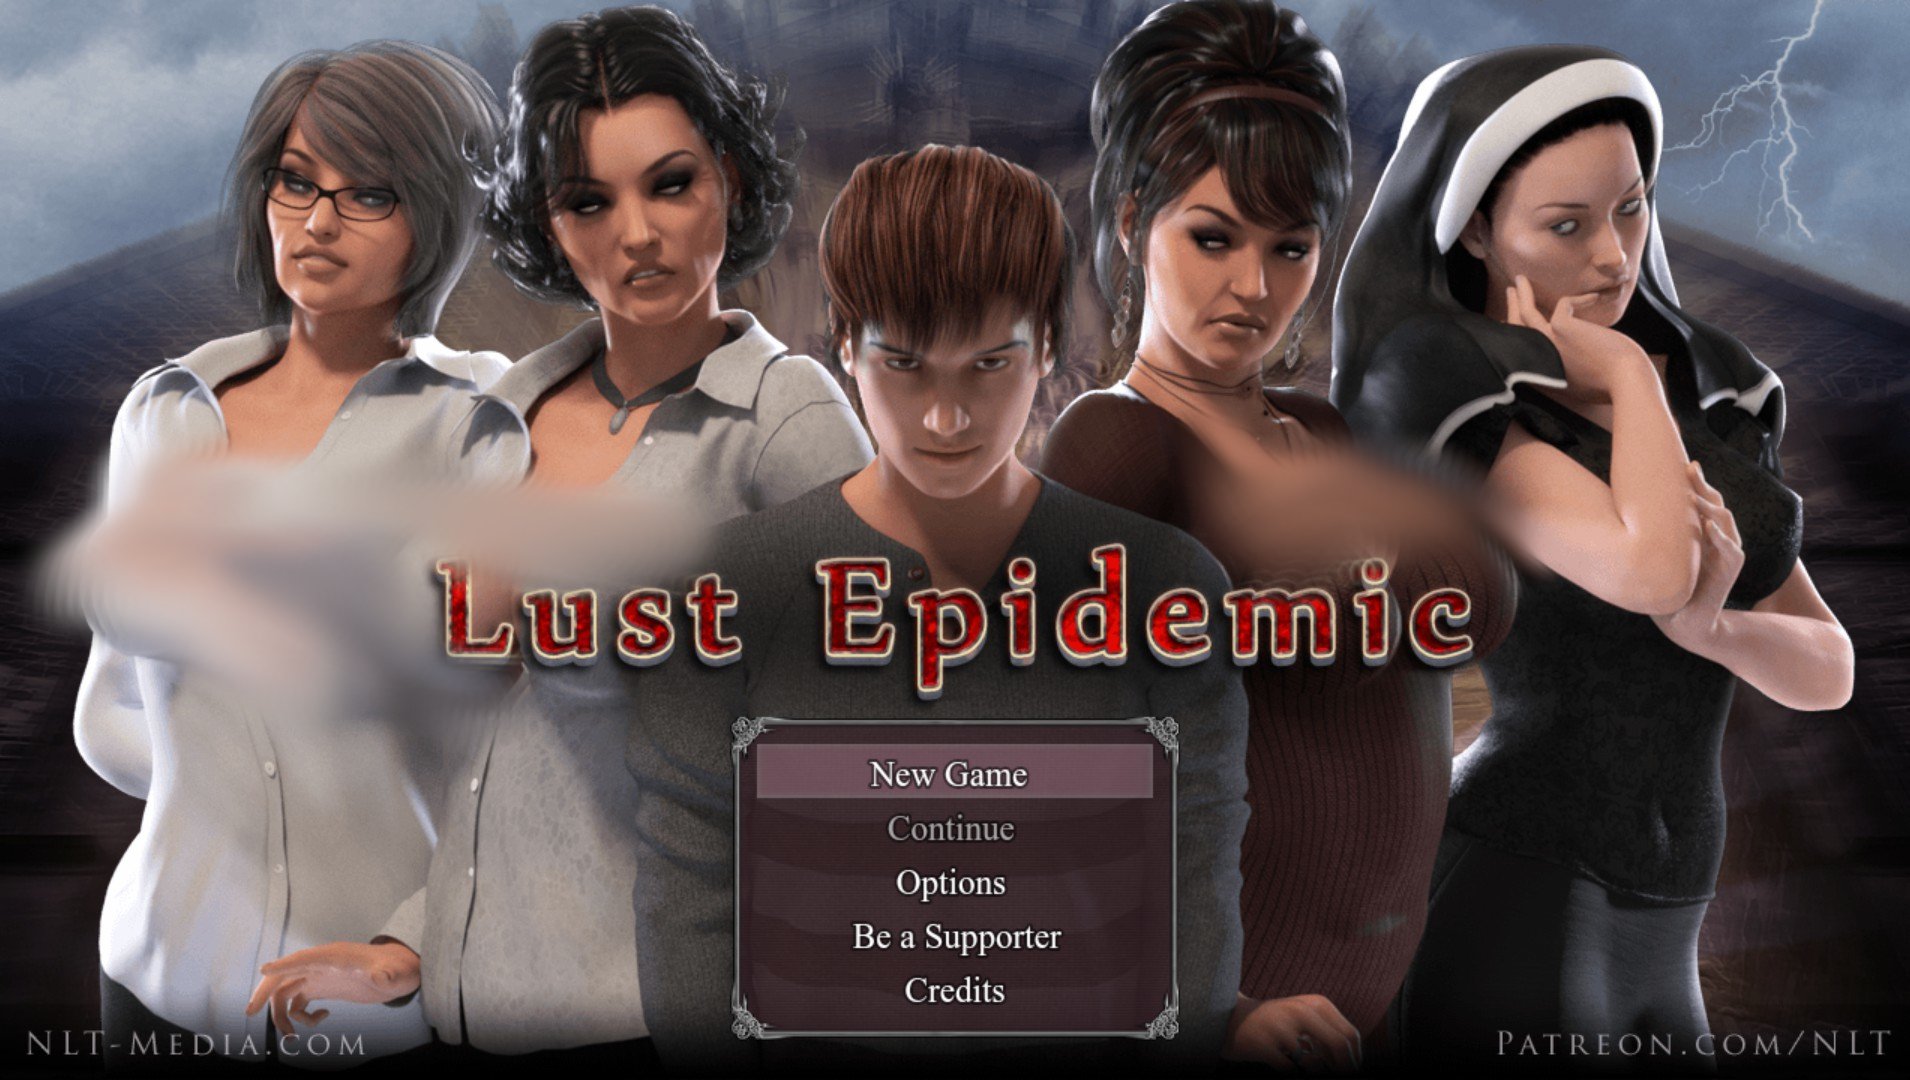 lust-epidemic-guide-free-download-lisanilsson